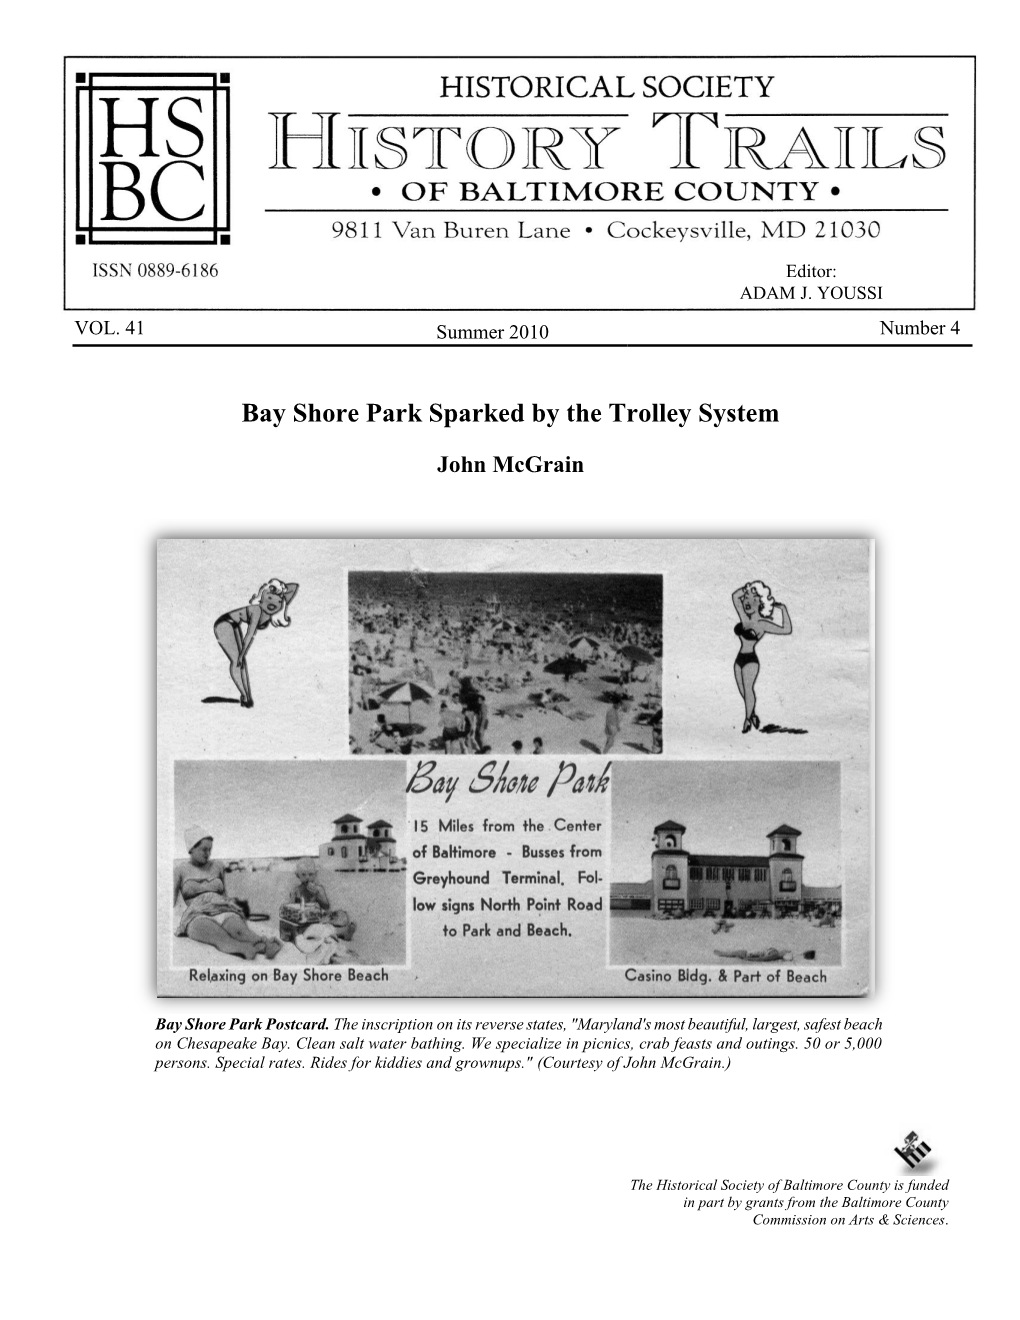 Bay Shore Park Sparked by the Trolley System